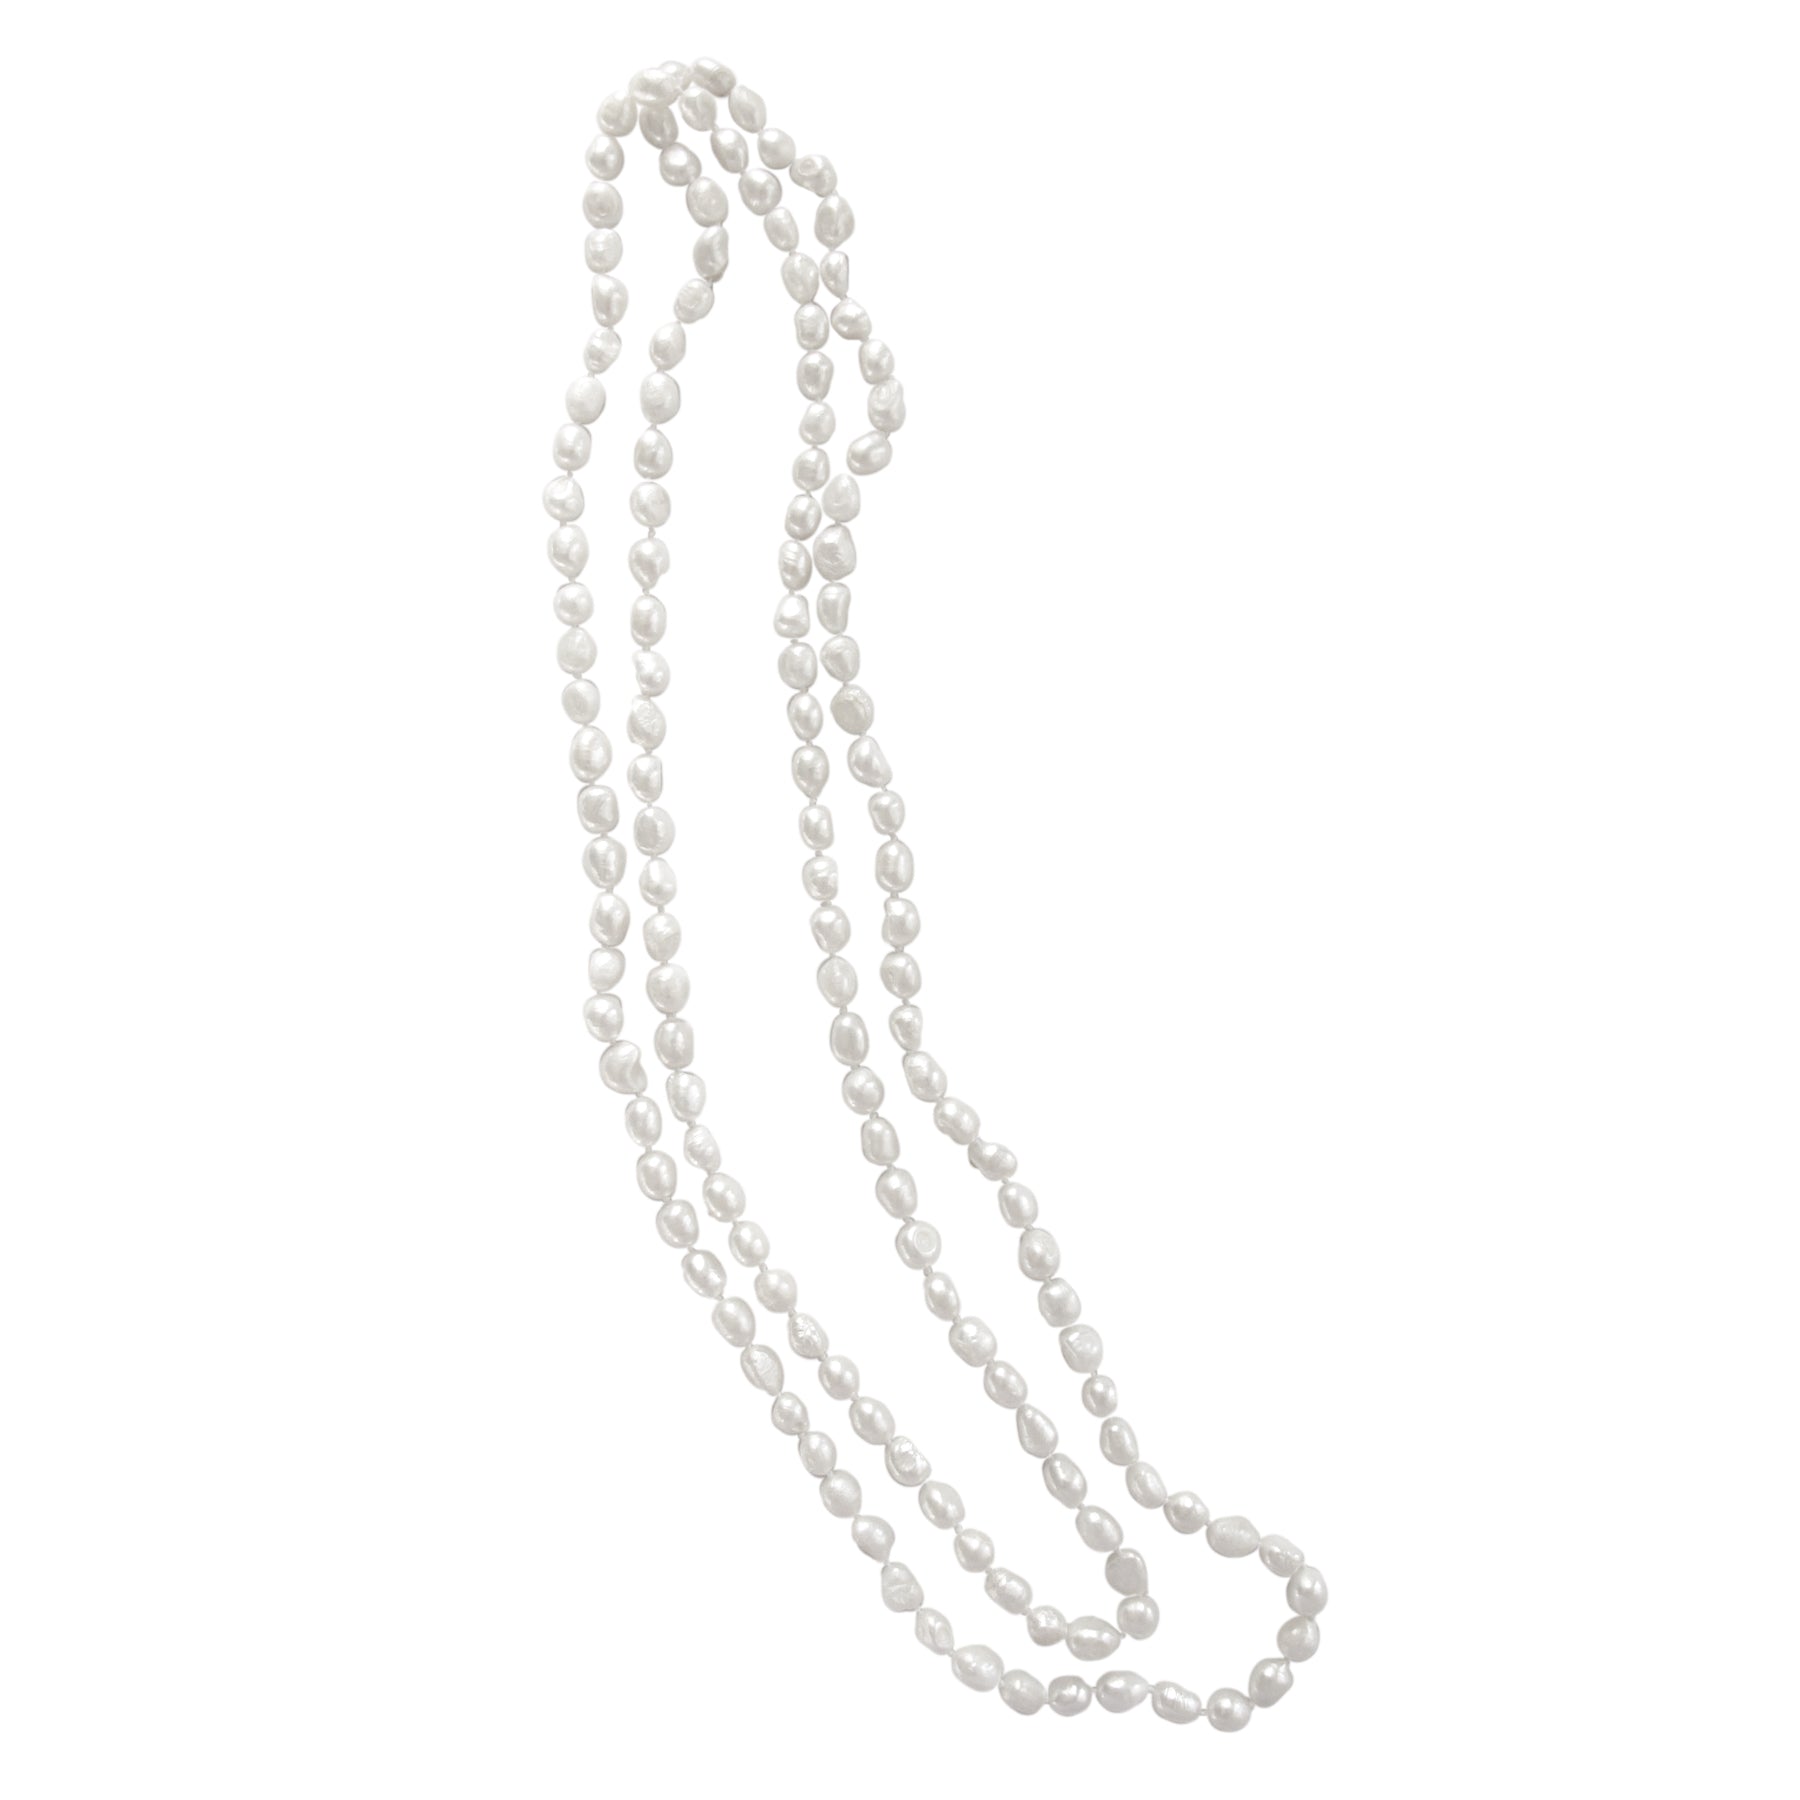 48” Freshwater Pearl Necklace